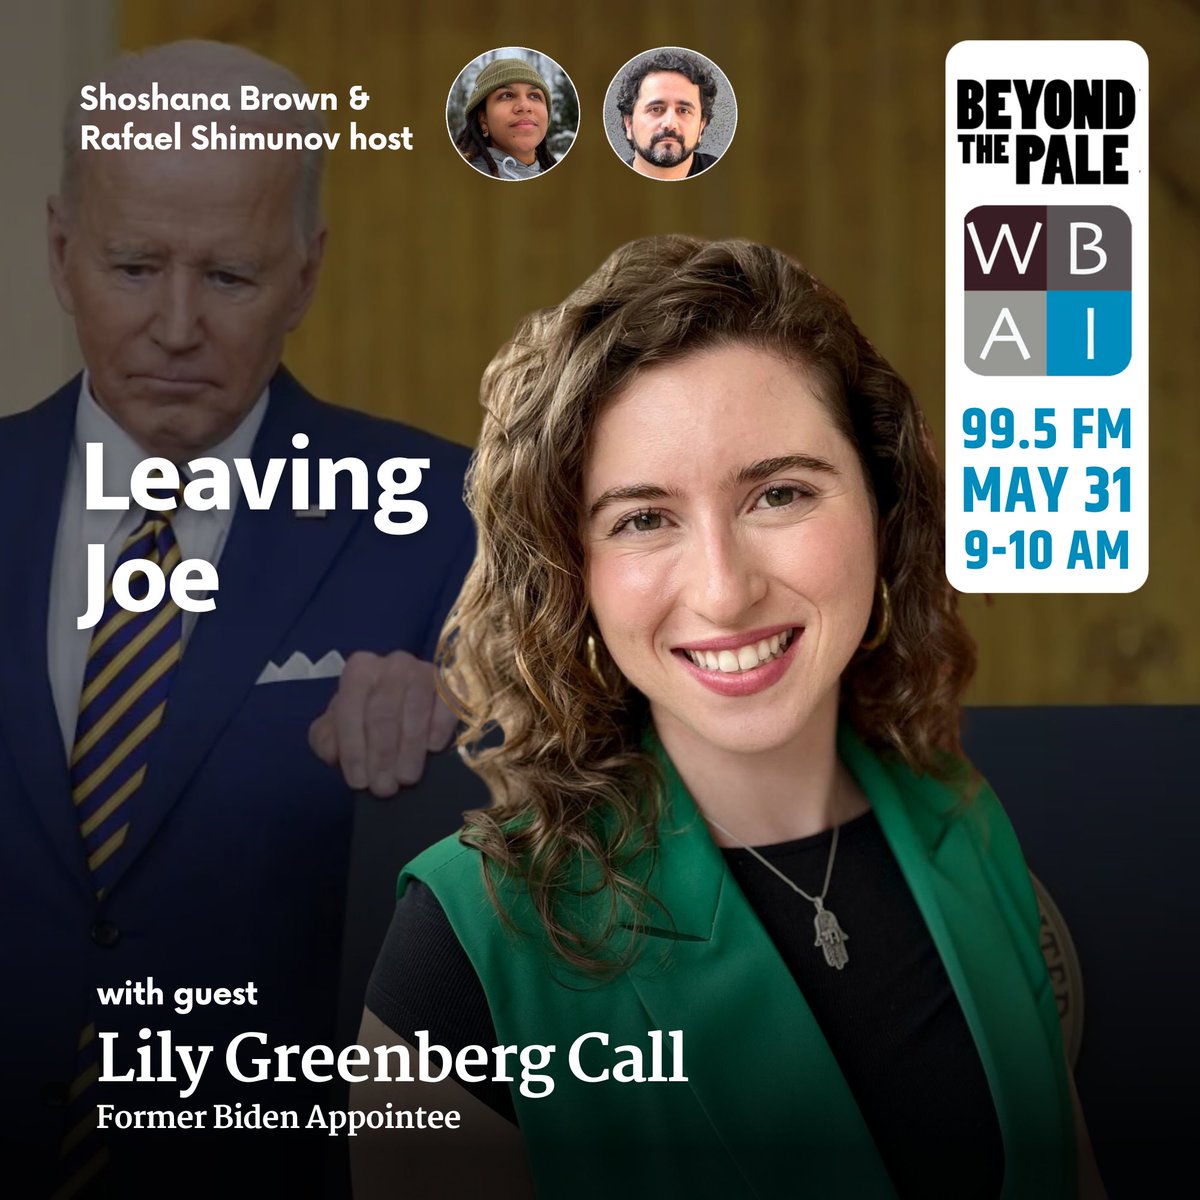 Friday, we're live with @LGreenbergCall, the first Jewish Biden appointee to resign over Gaza. Send her your voicemail questions or messages and we'll play them on air (917) 740-8971.